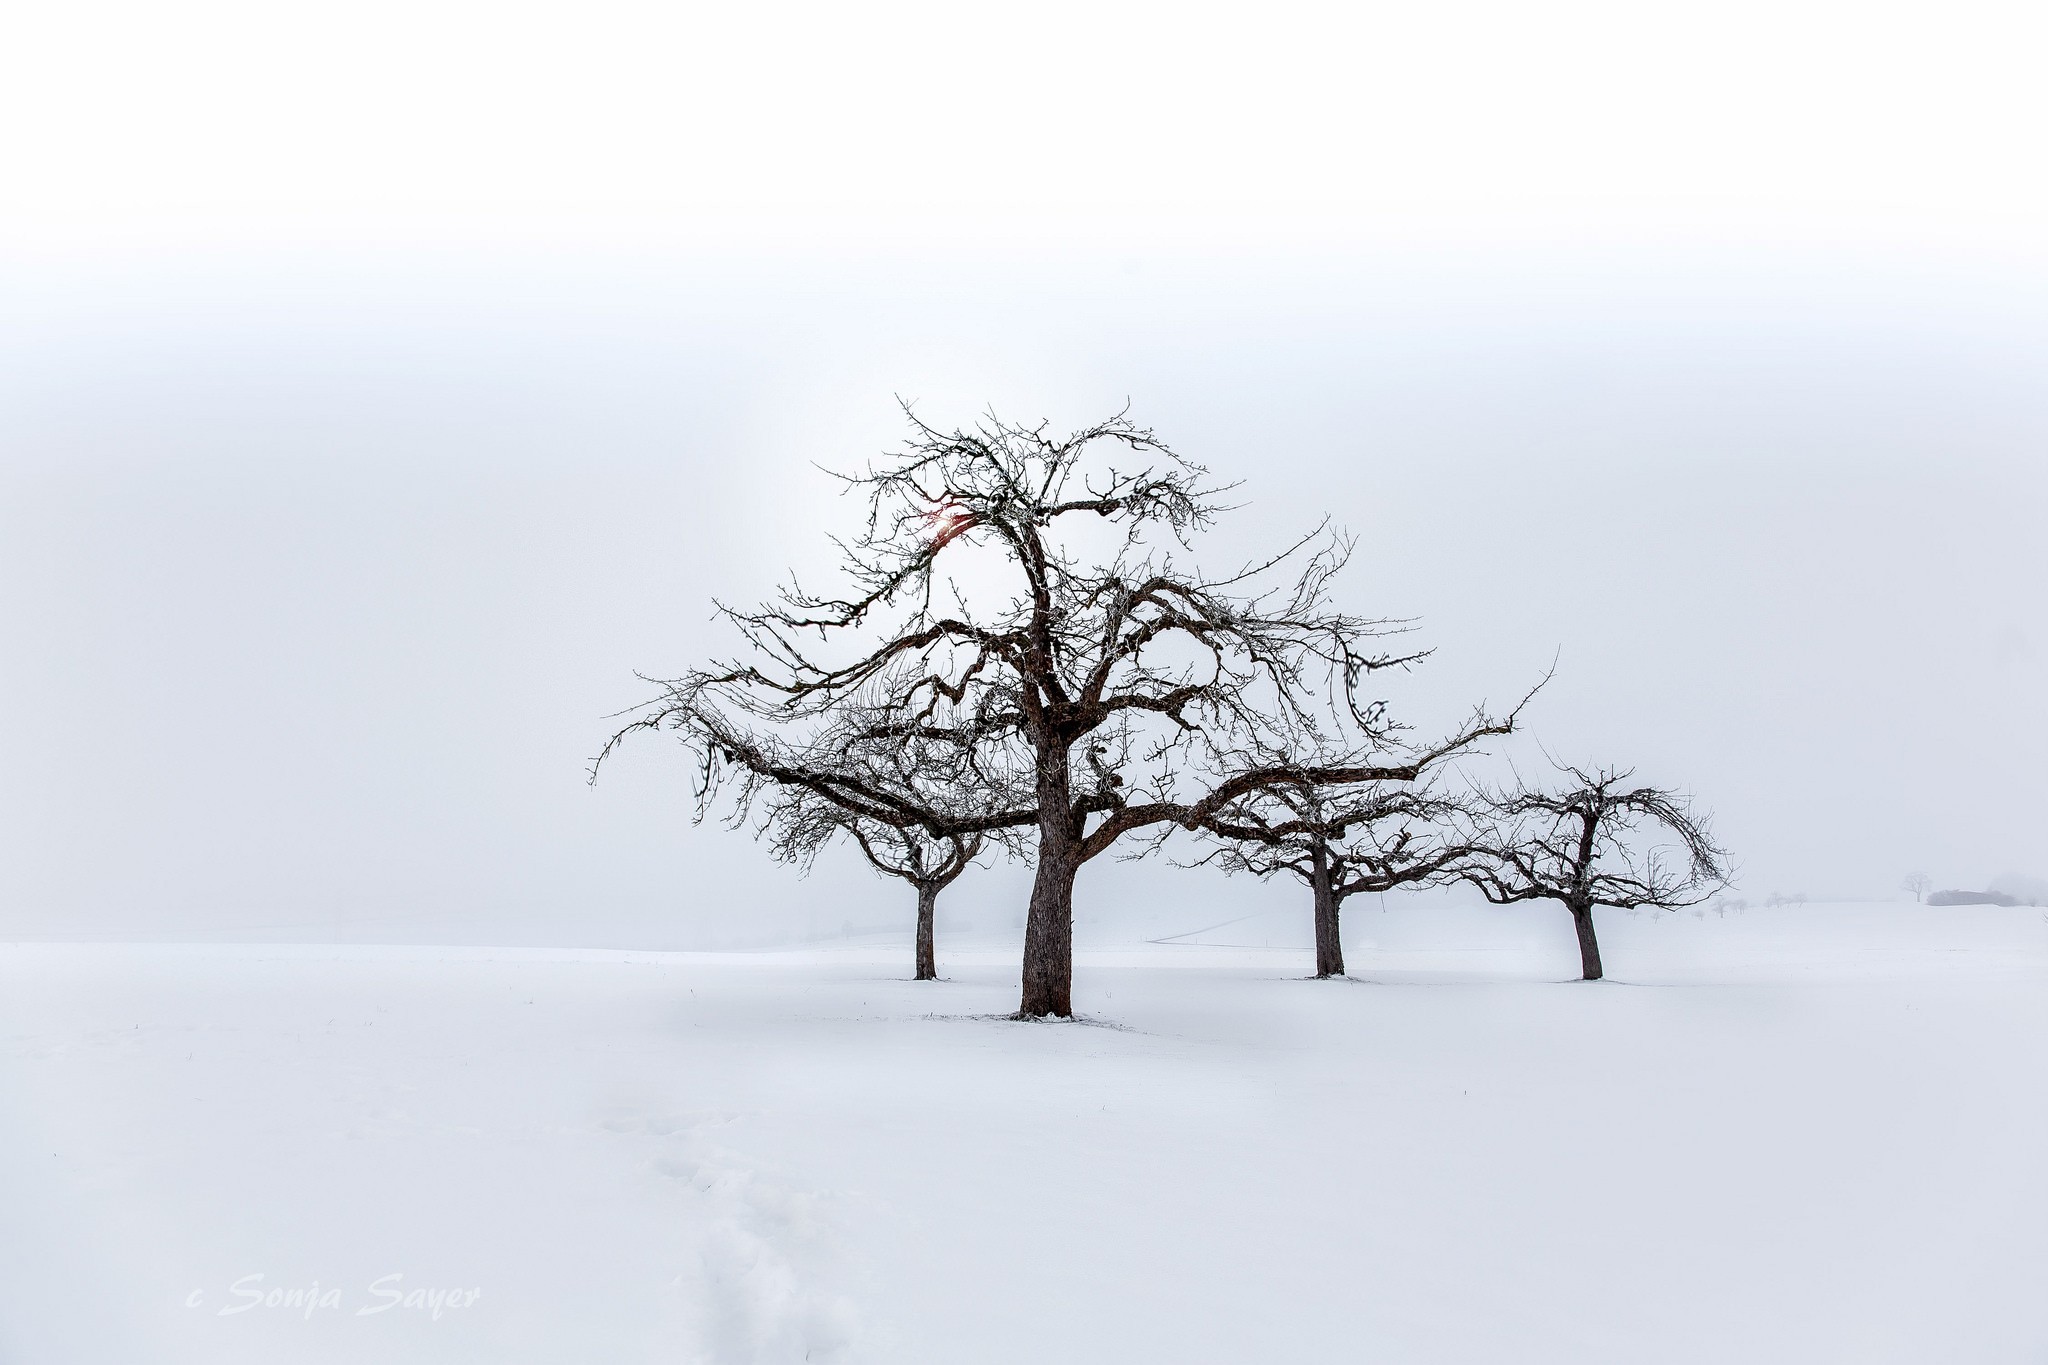 General 2048x1365 landscape trees seasons nature snow cold winter